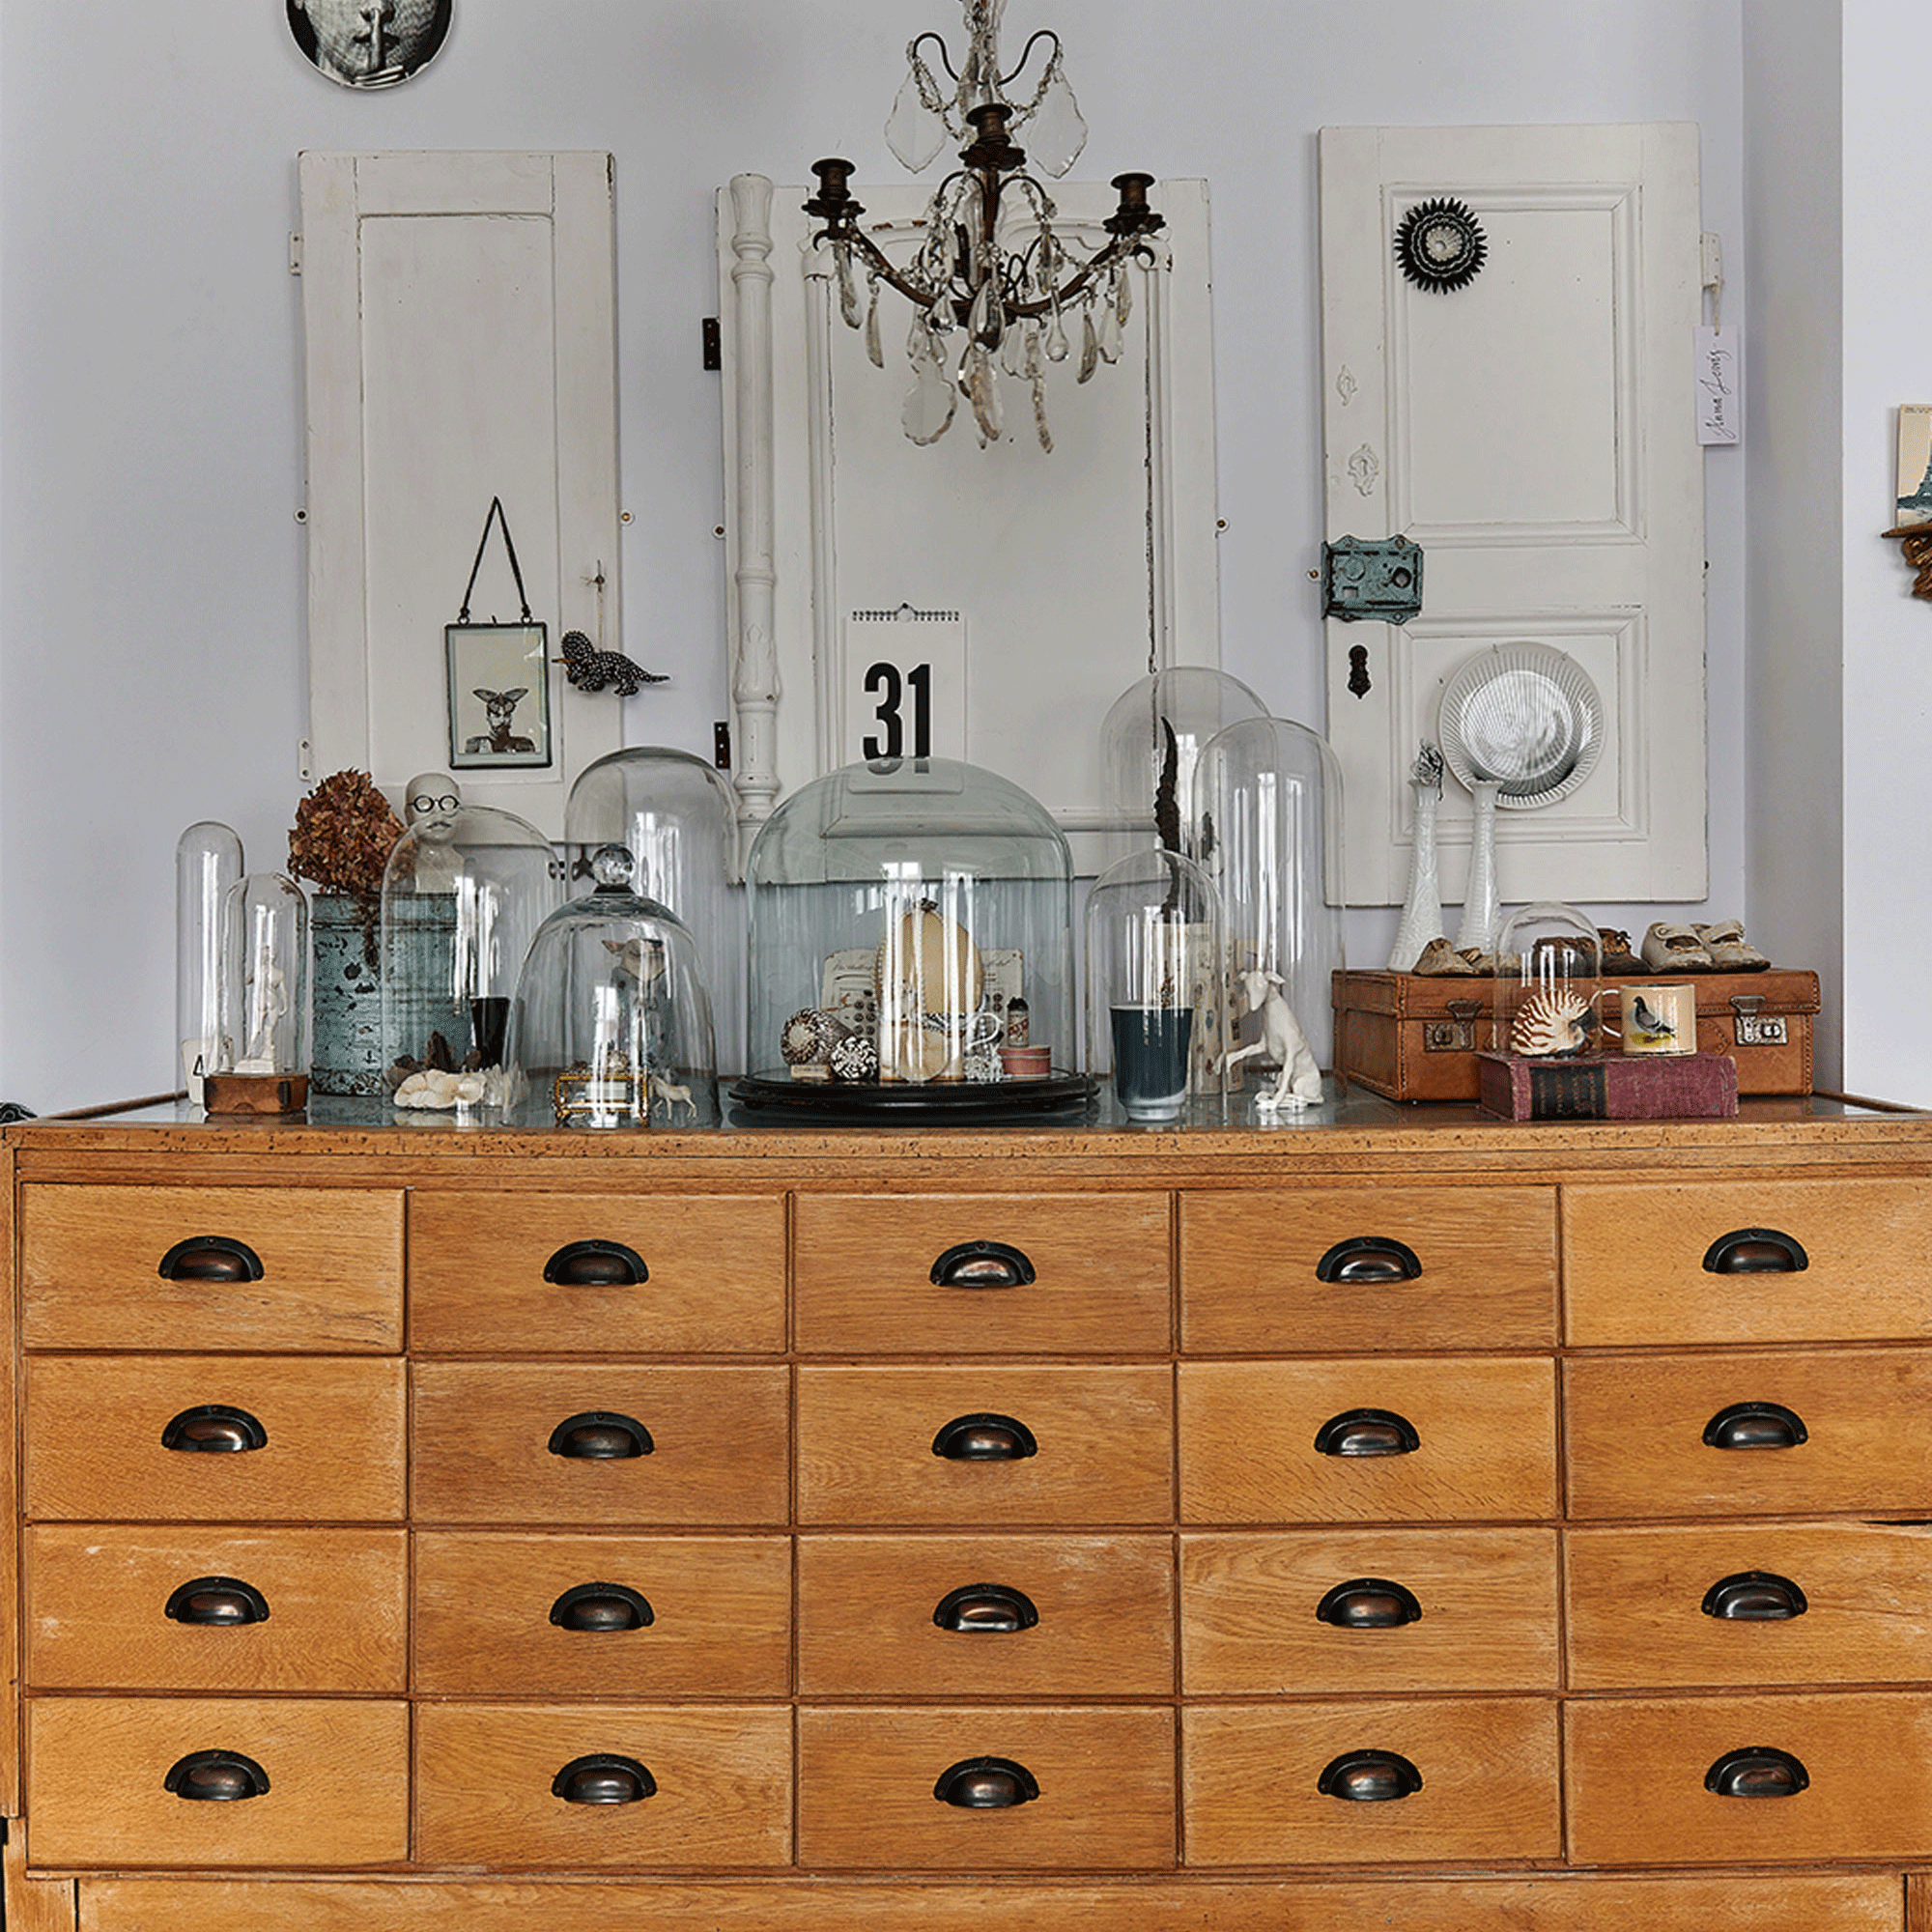 This 1930s semi has been restored to its former glory with vintage finds